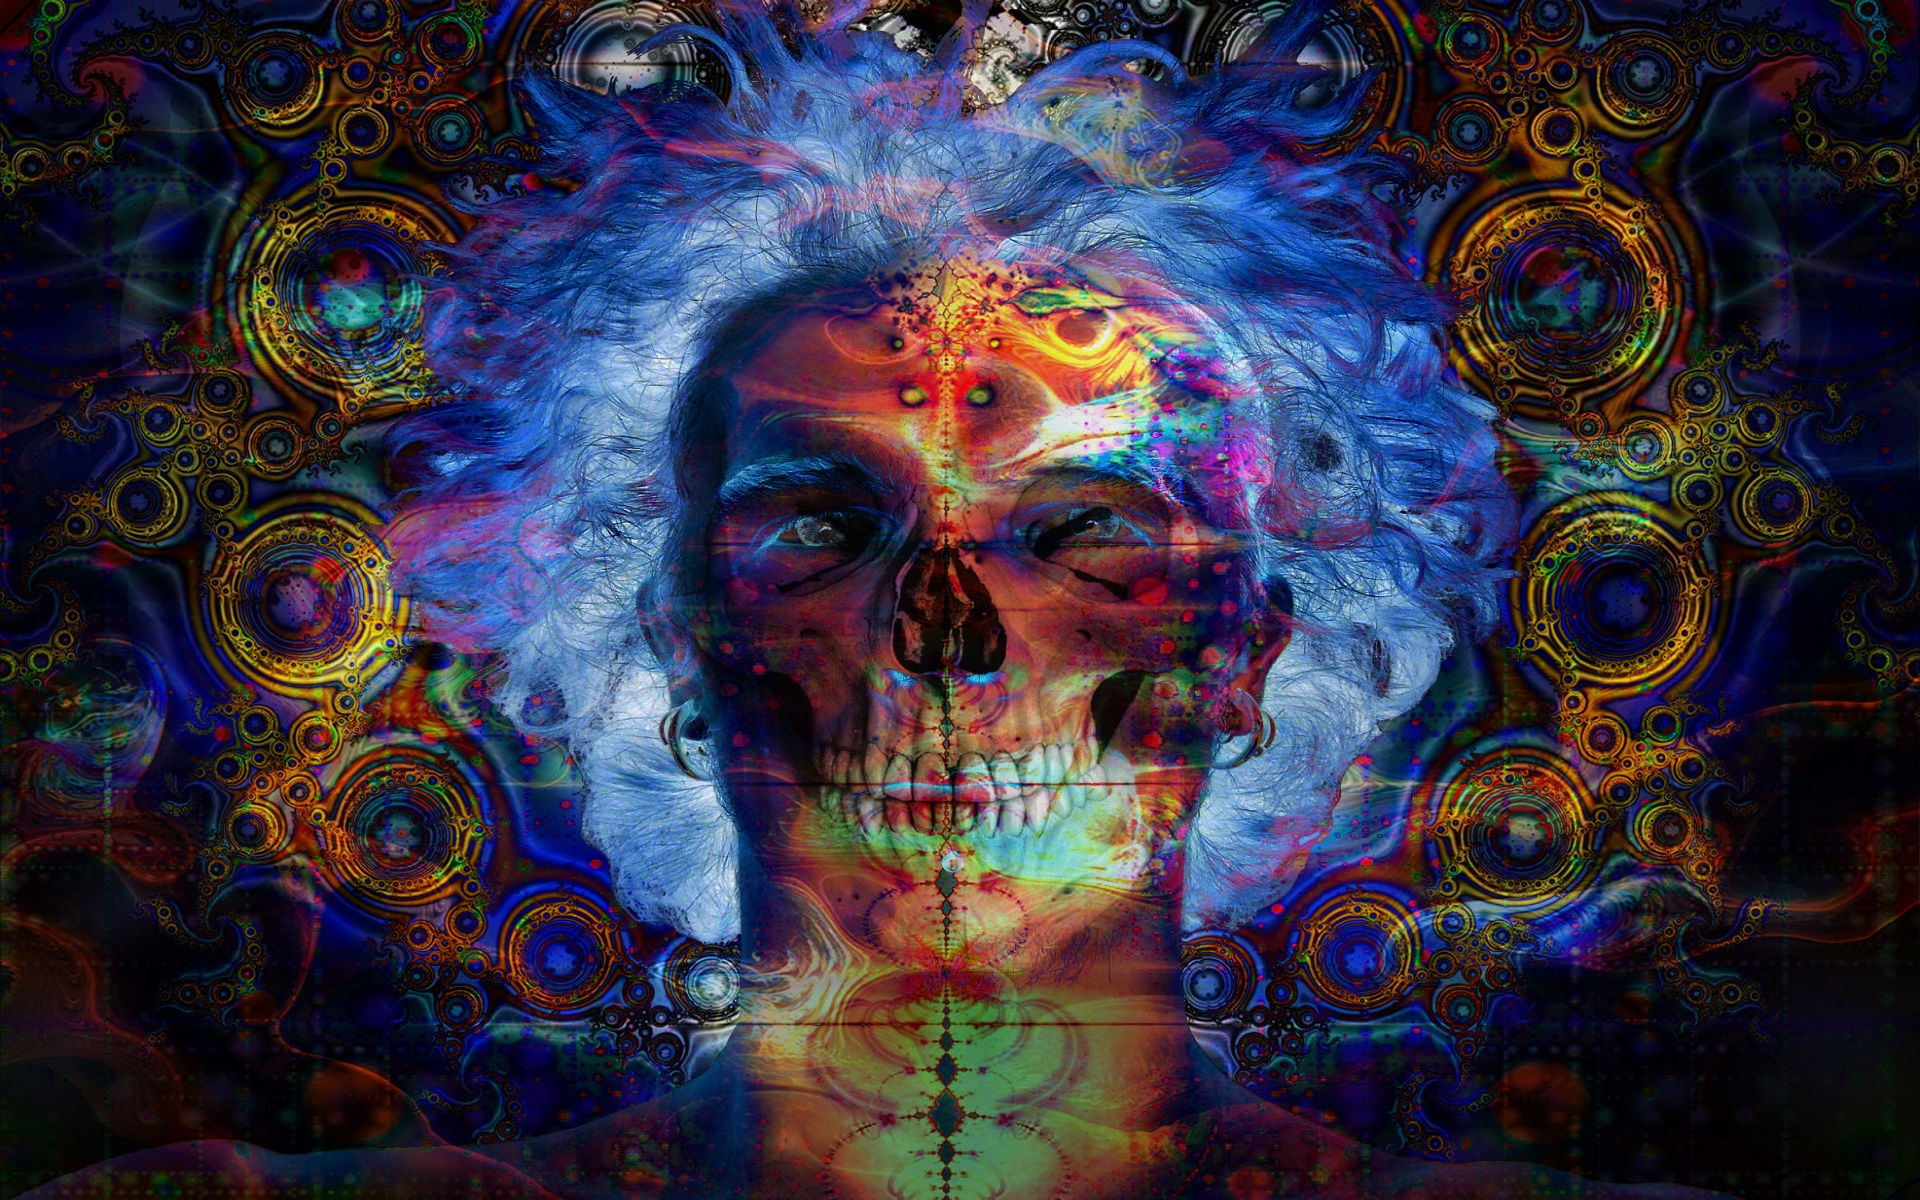 Psychedelic Wallpapers Free Download - Psychedelic Hd Wallpapers | nawpic